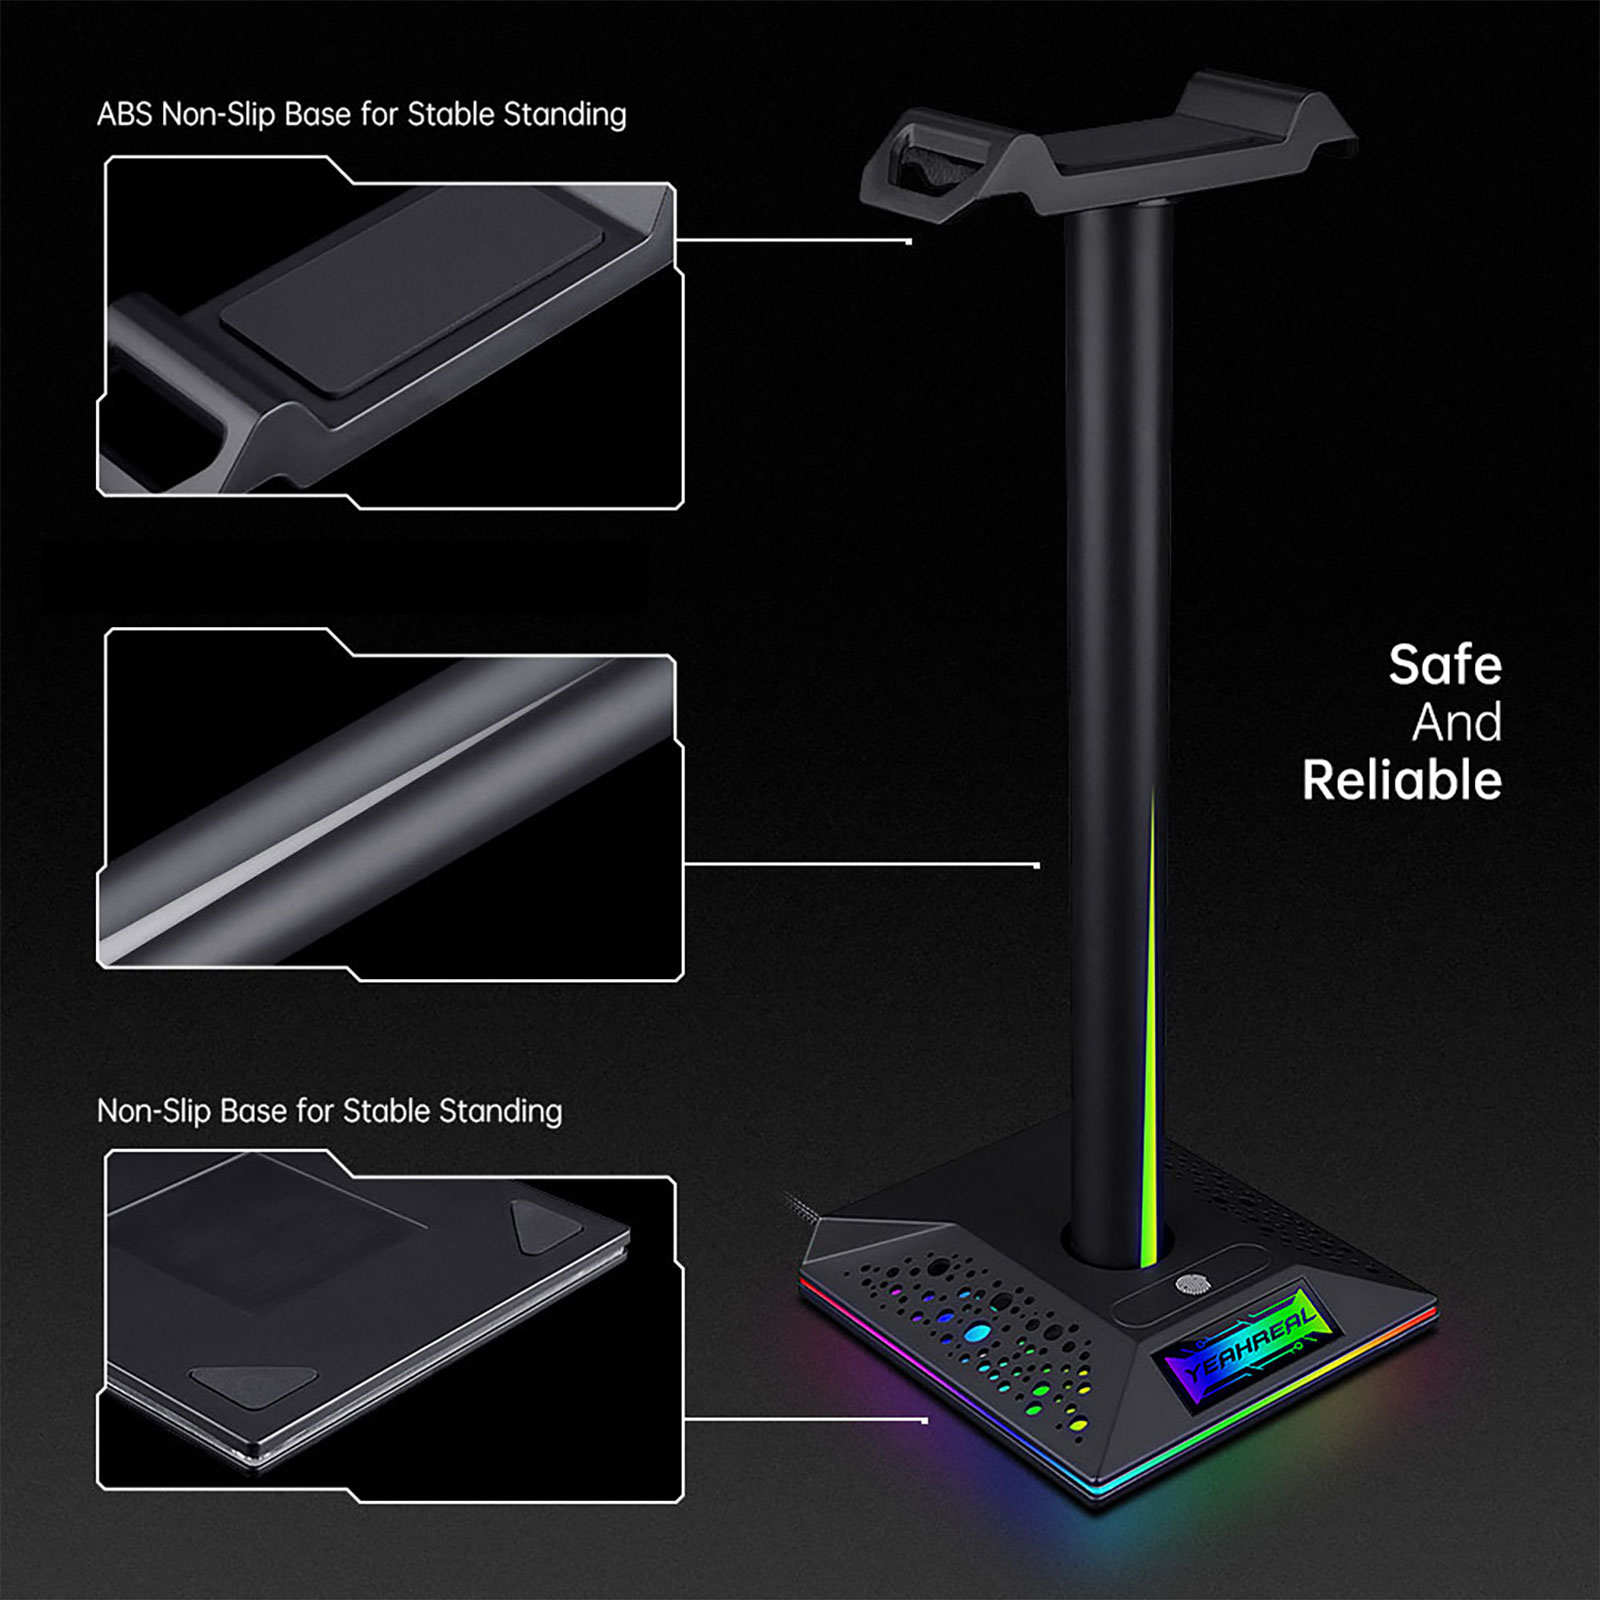 TSV RGB Headset Stand with USB and Lighting